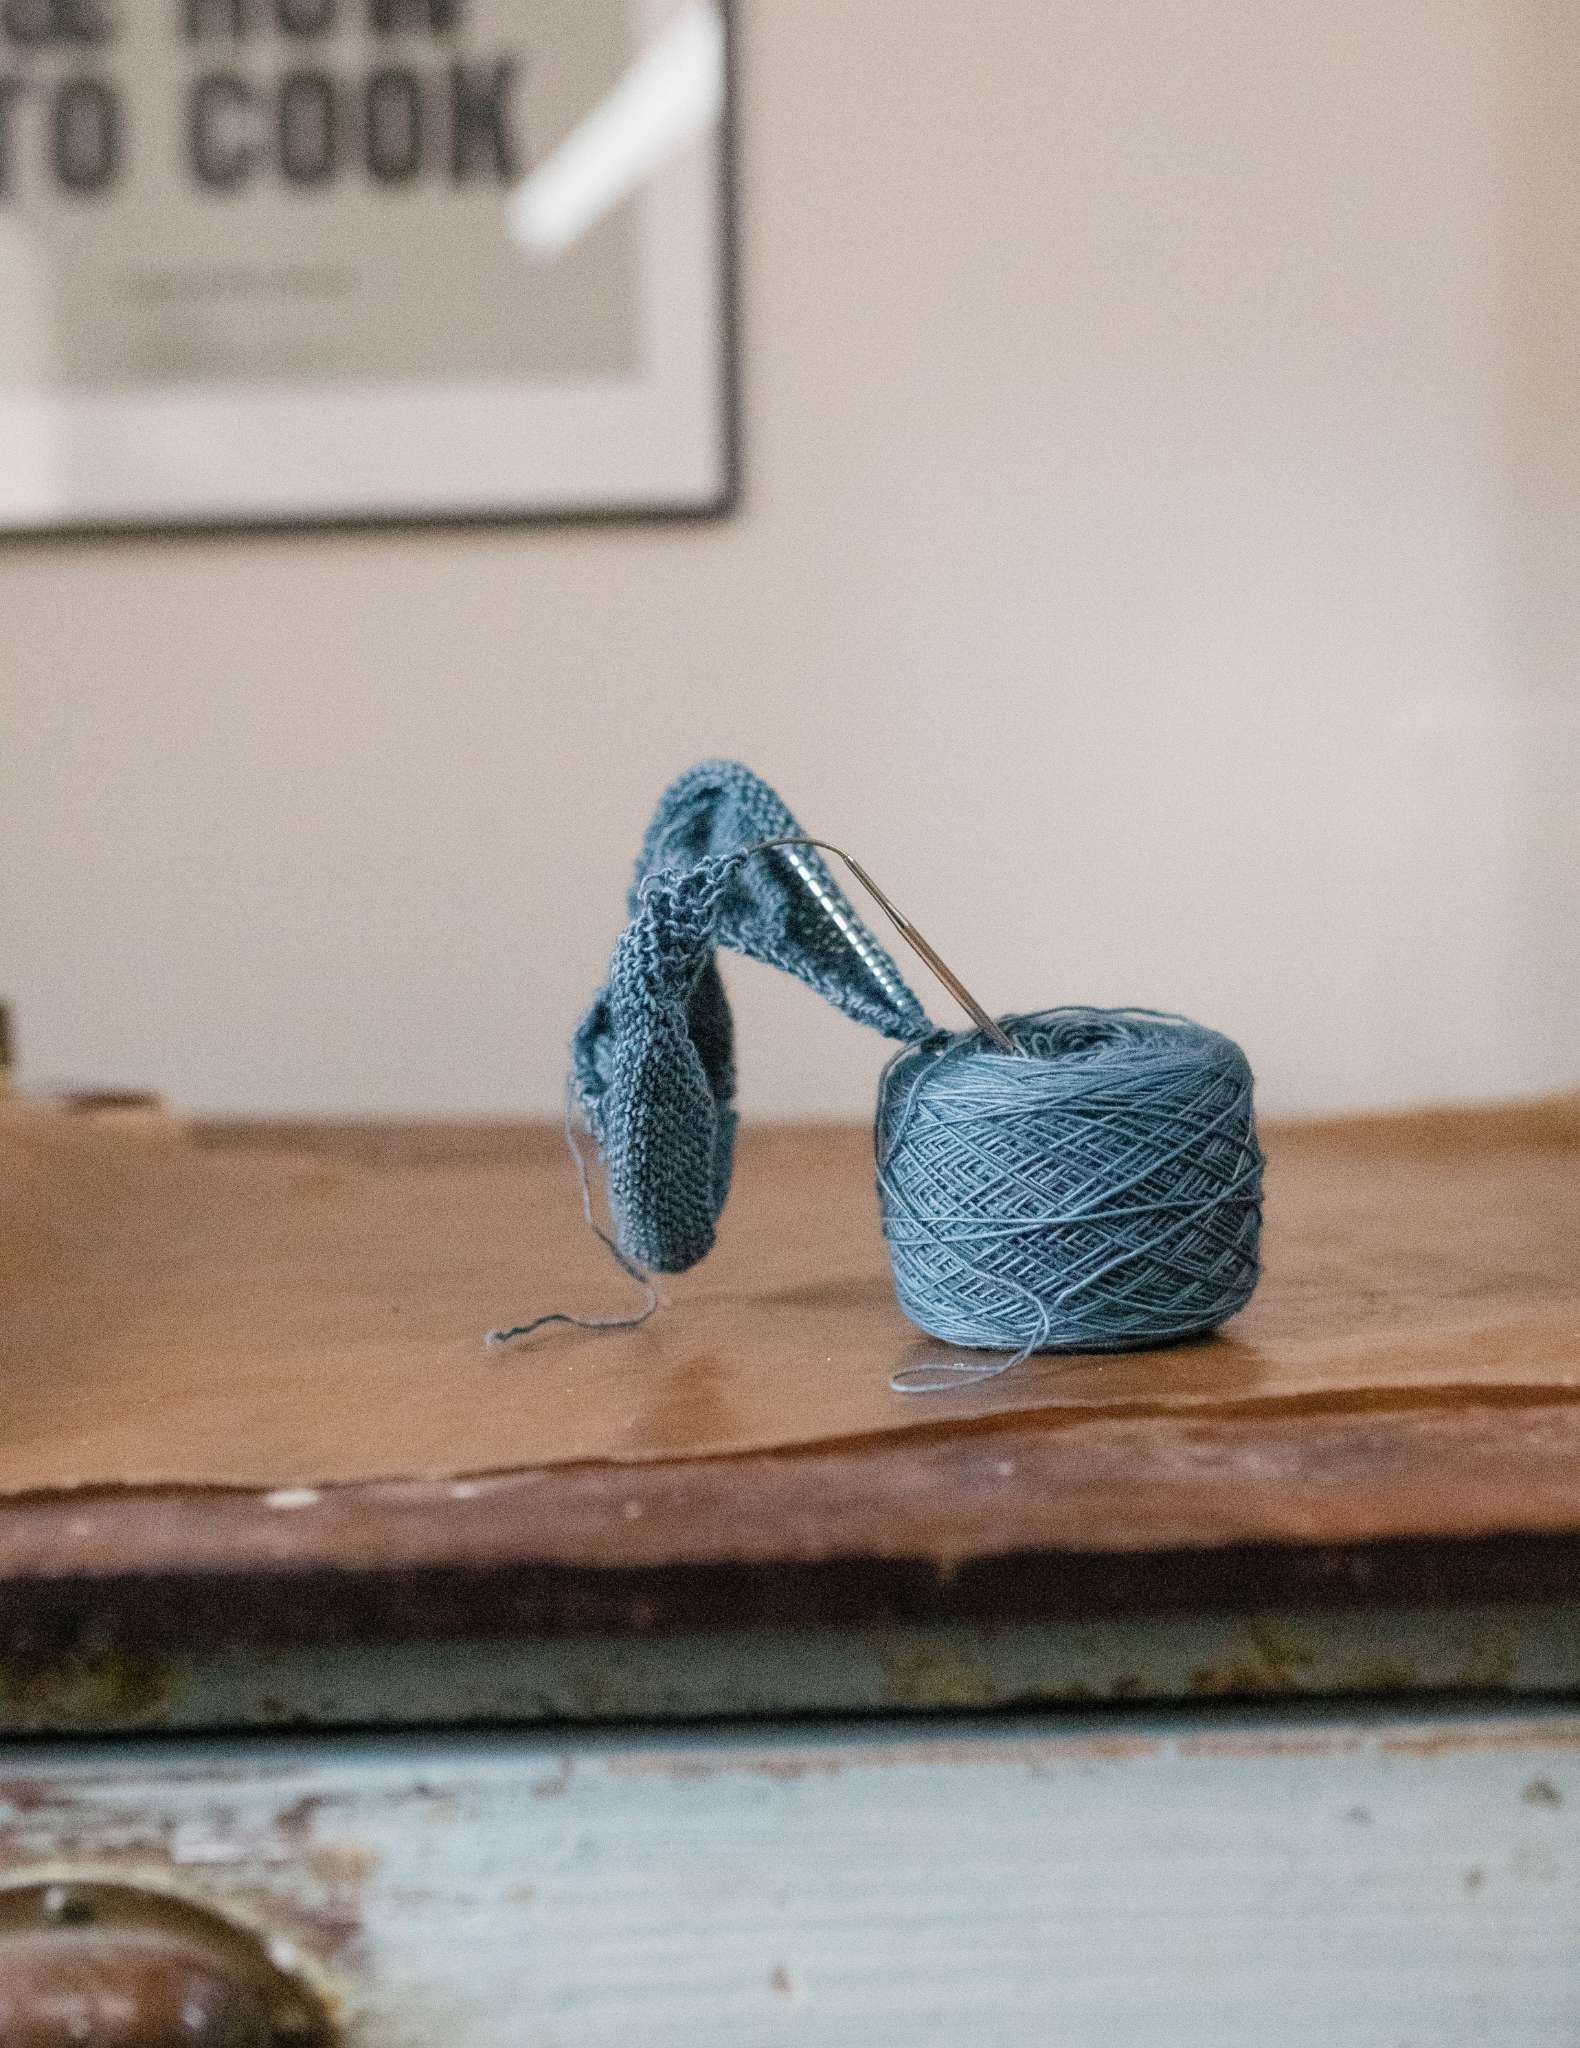 A ball of blue yarn with a project on the needles sticking out of the top of it, sitting on a wooden surface in front of a wall with an art print.